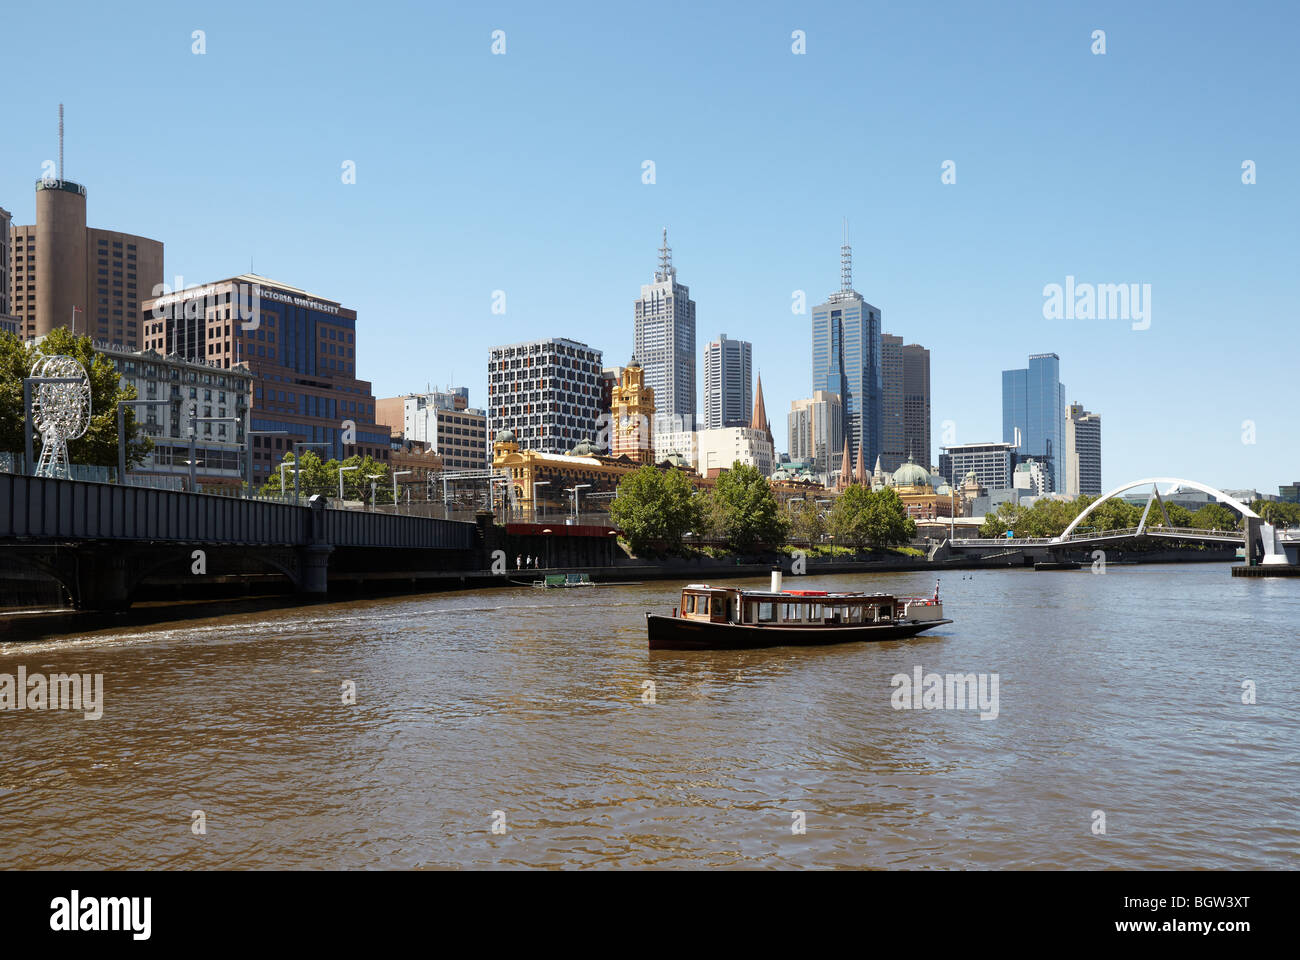 A river cruise boat on the Yarra river with a city view, Melbourne, Victoria, Australia Stock Photo